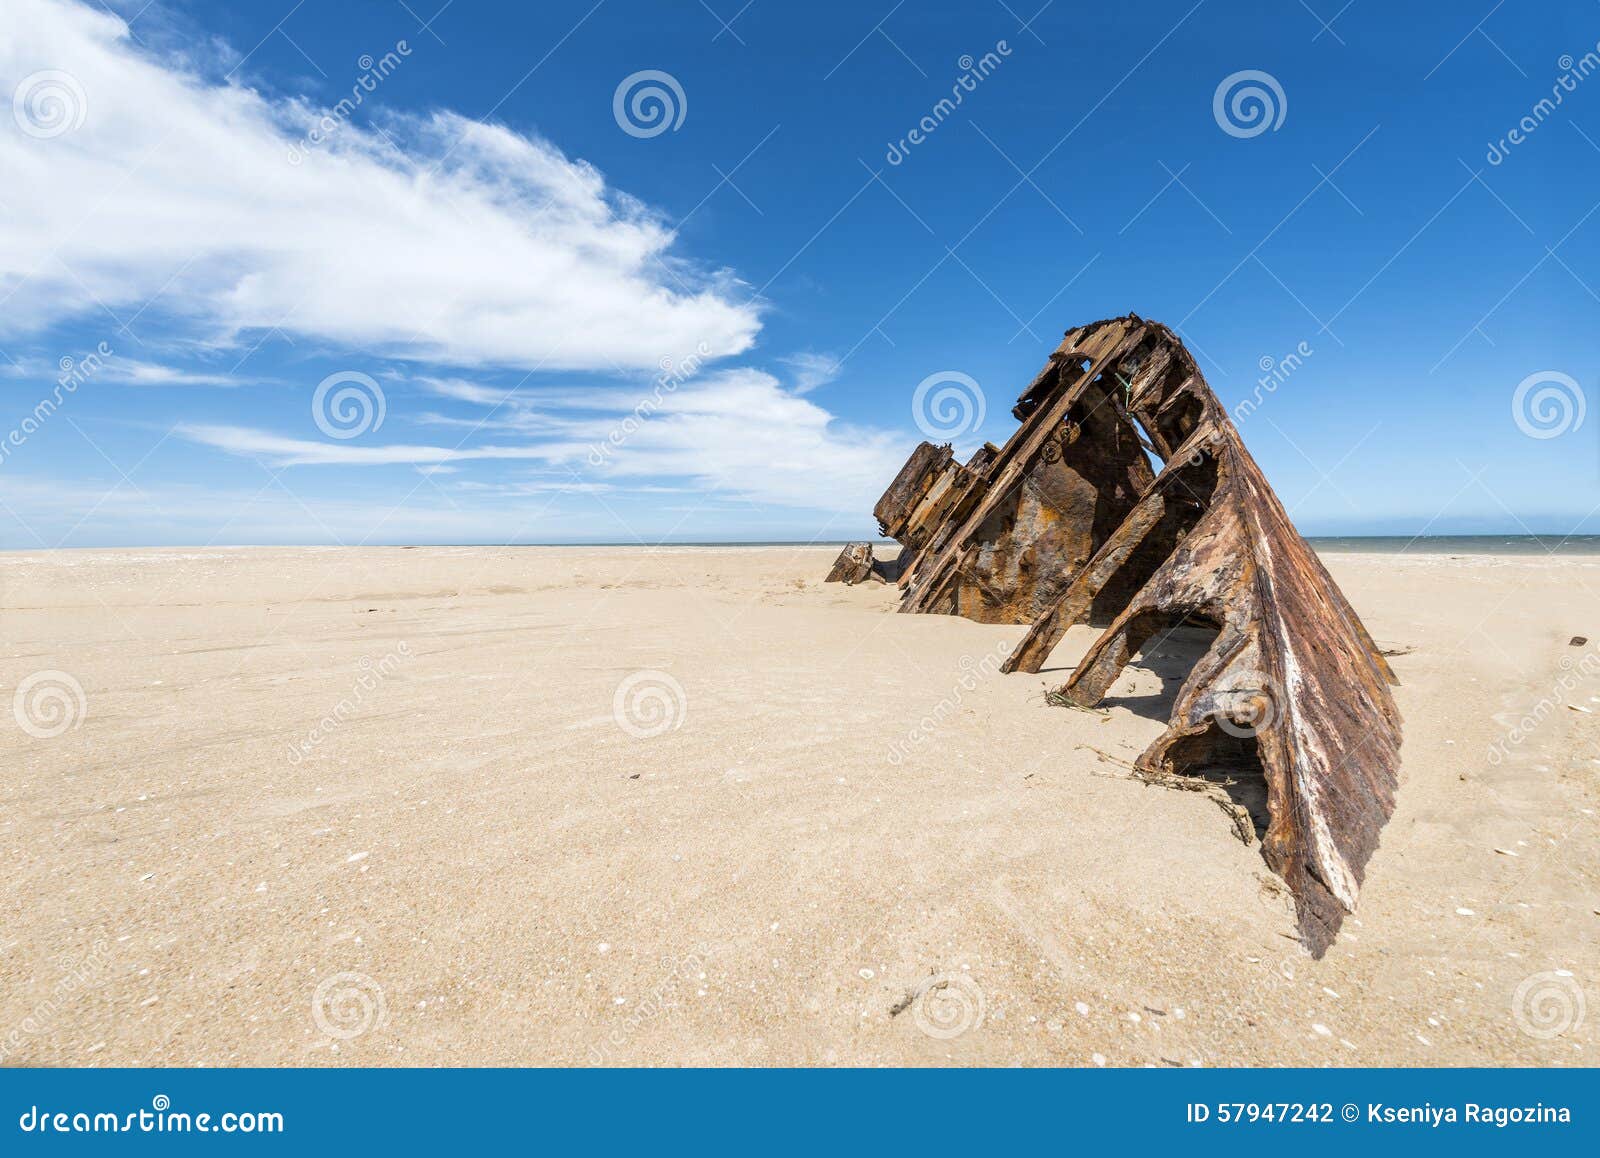 famous beach el barco with rusty barge in uruguay